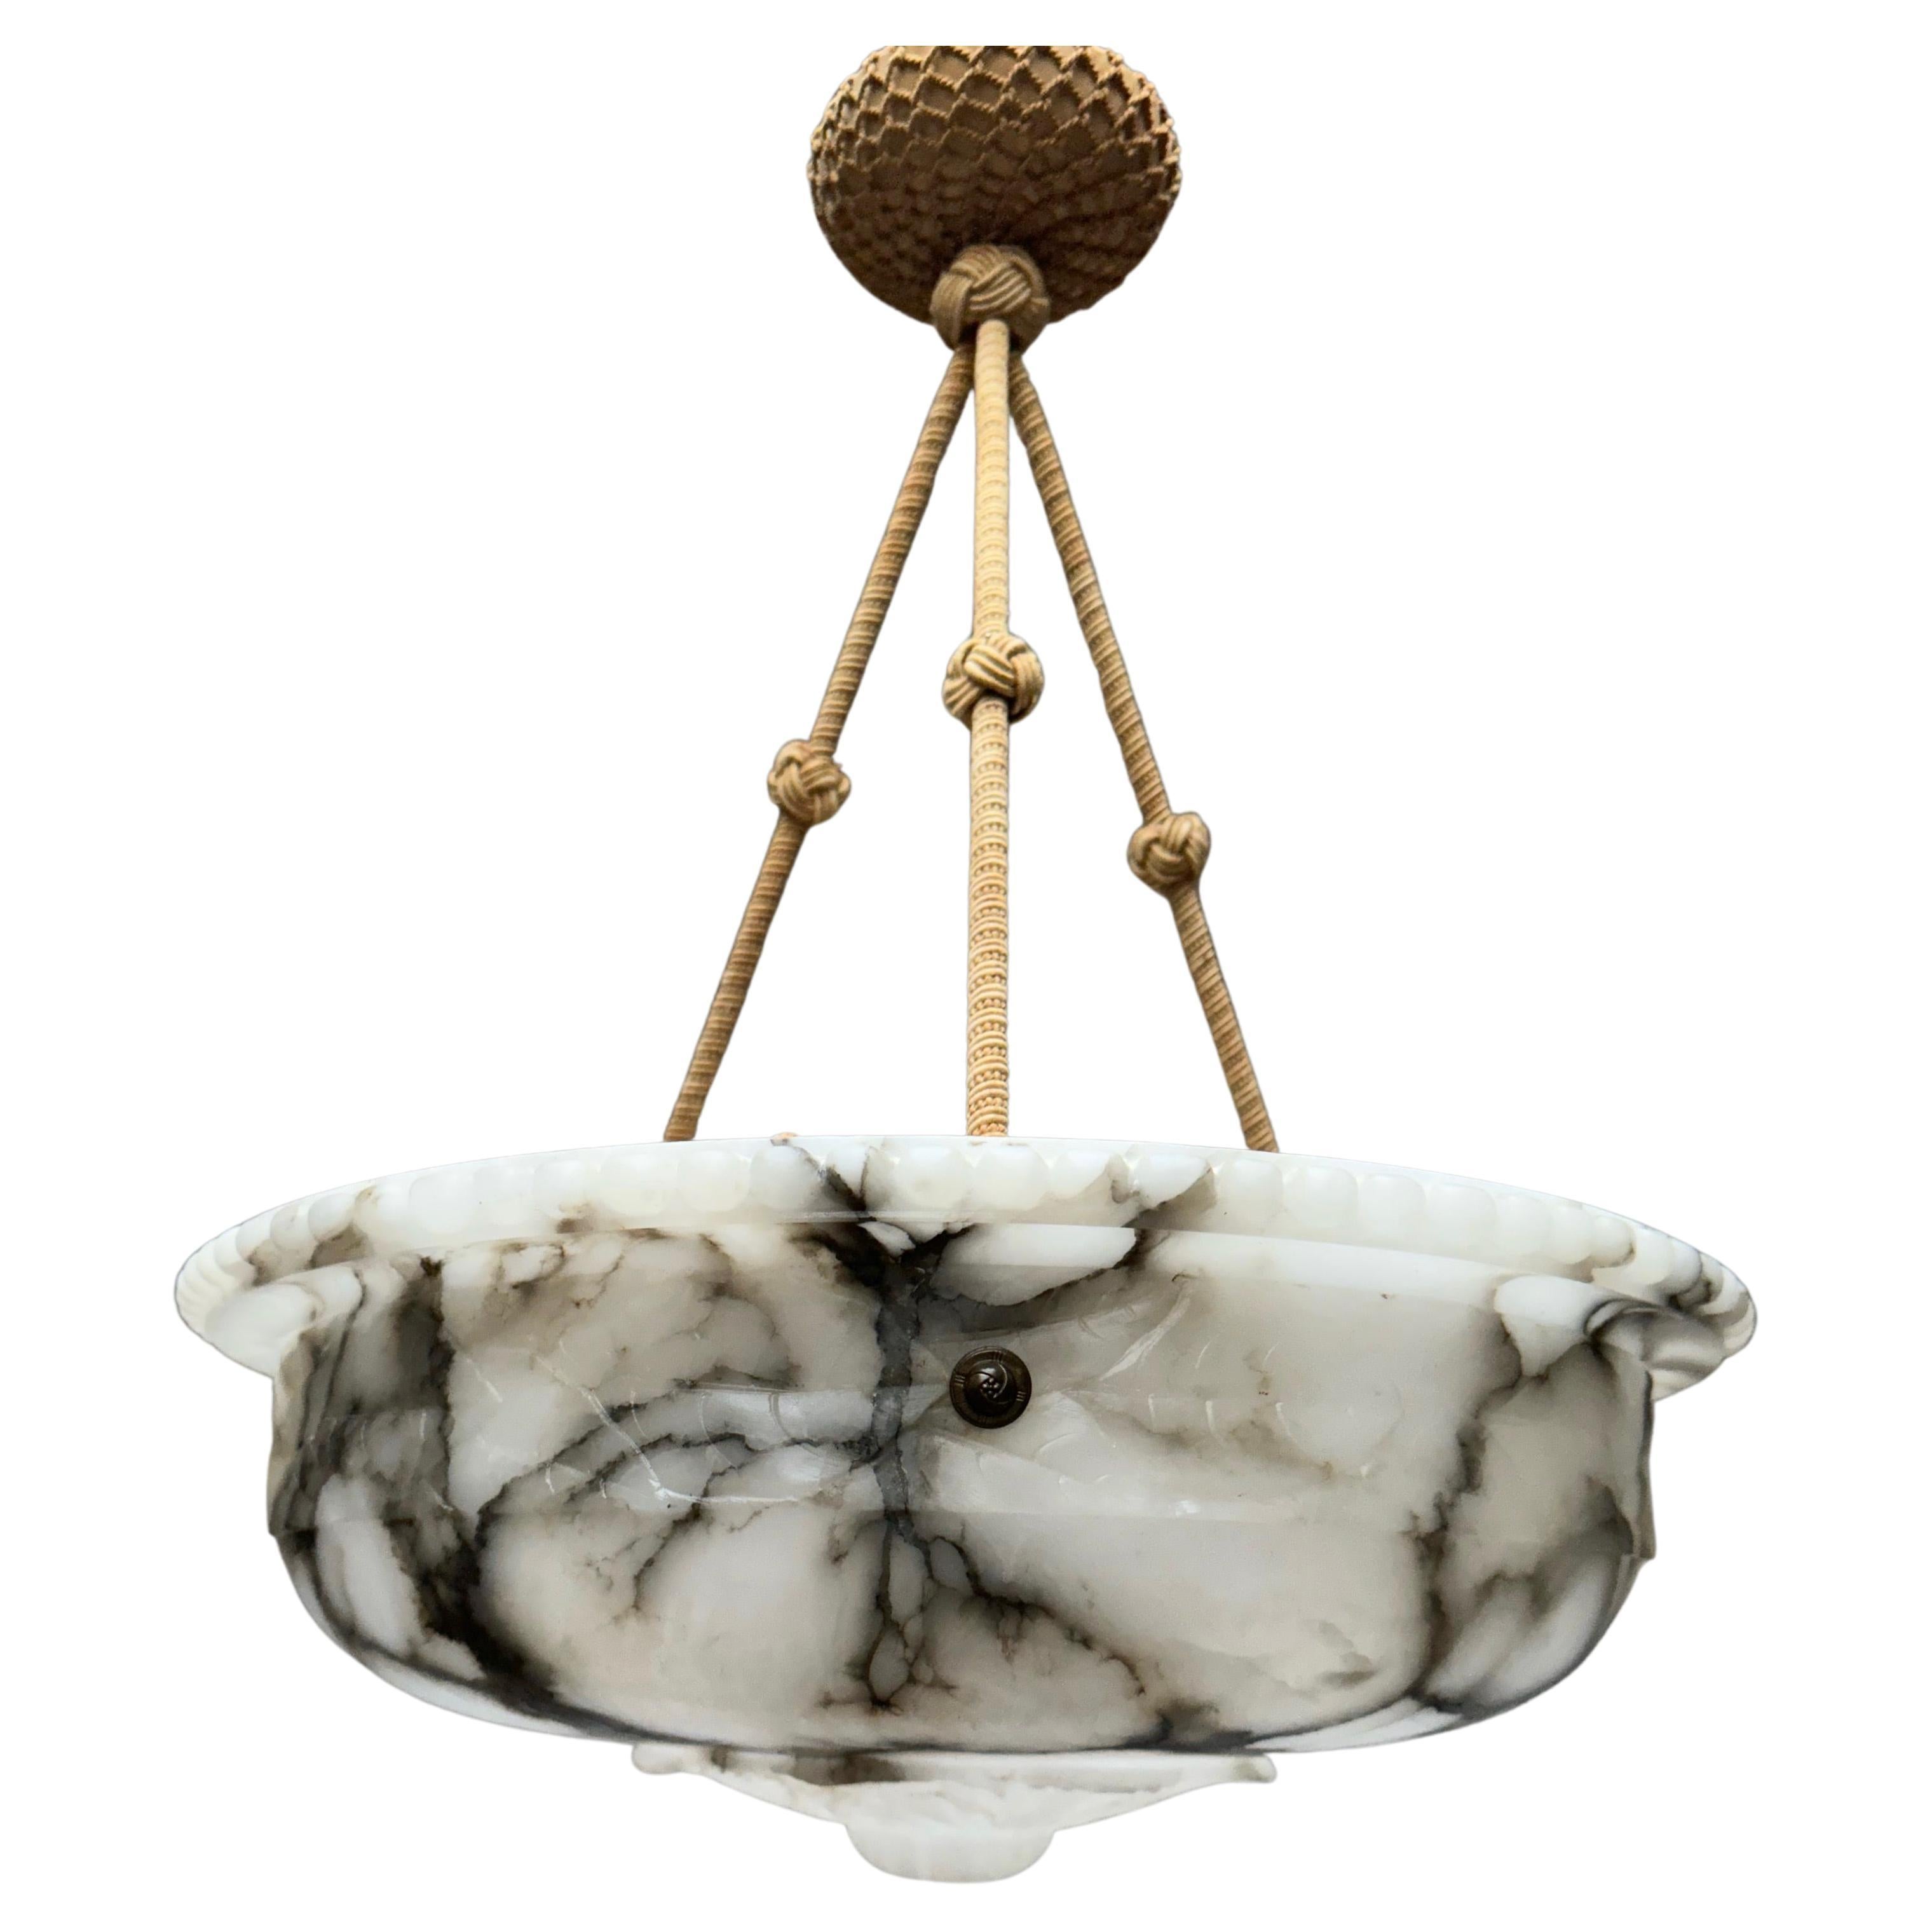 Antique 3-light chandelier with a large size and beautifully carved alabaster shade.

Thanks to its large size, its deep bowl shape and its classical design this great alabaster chandelier is bound to light up both your days and evenings. Besides